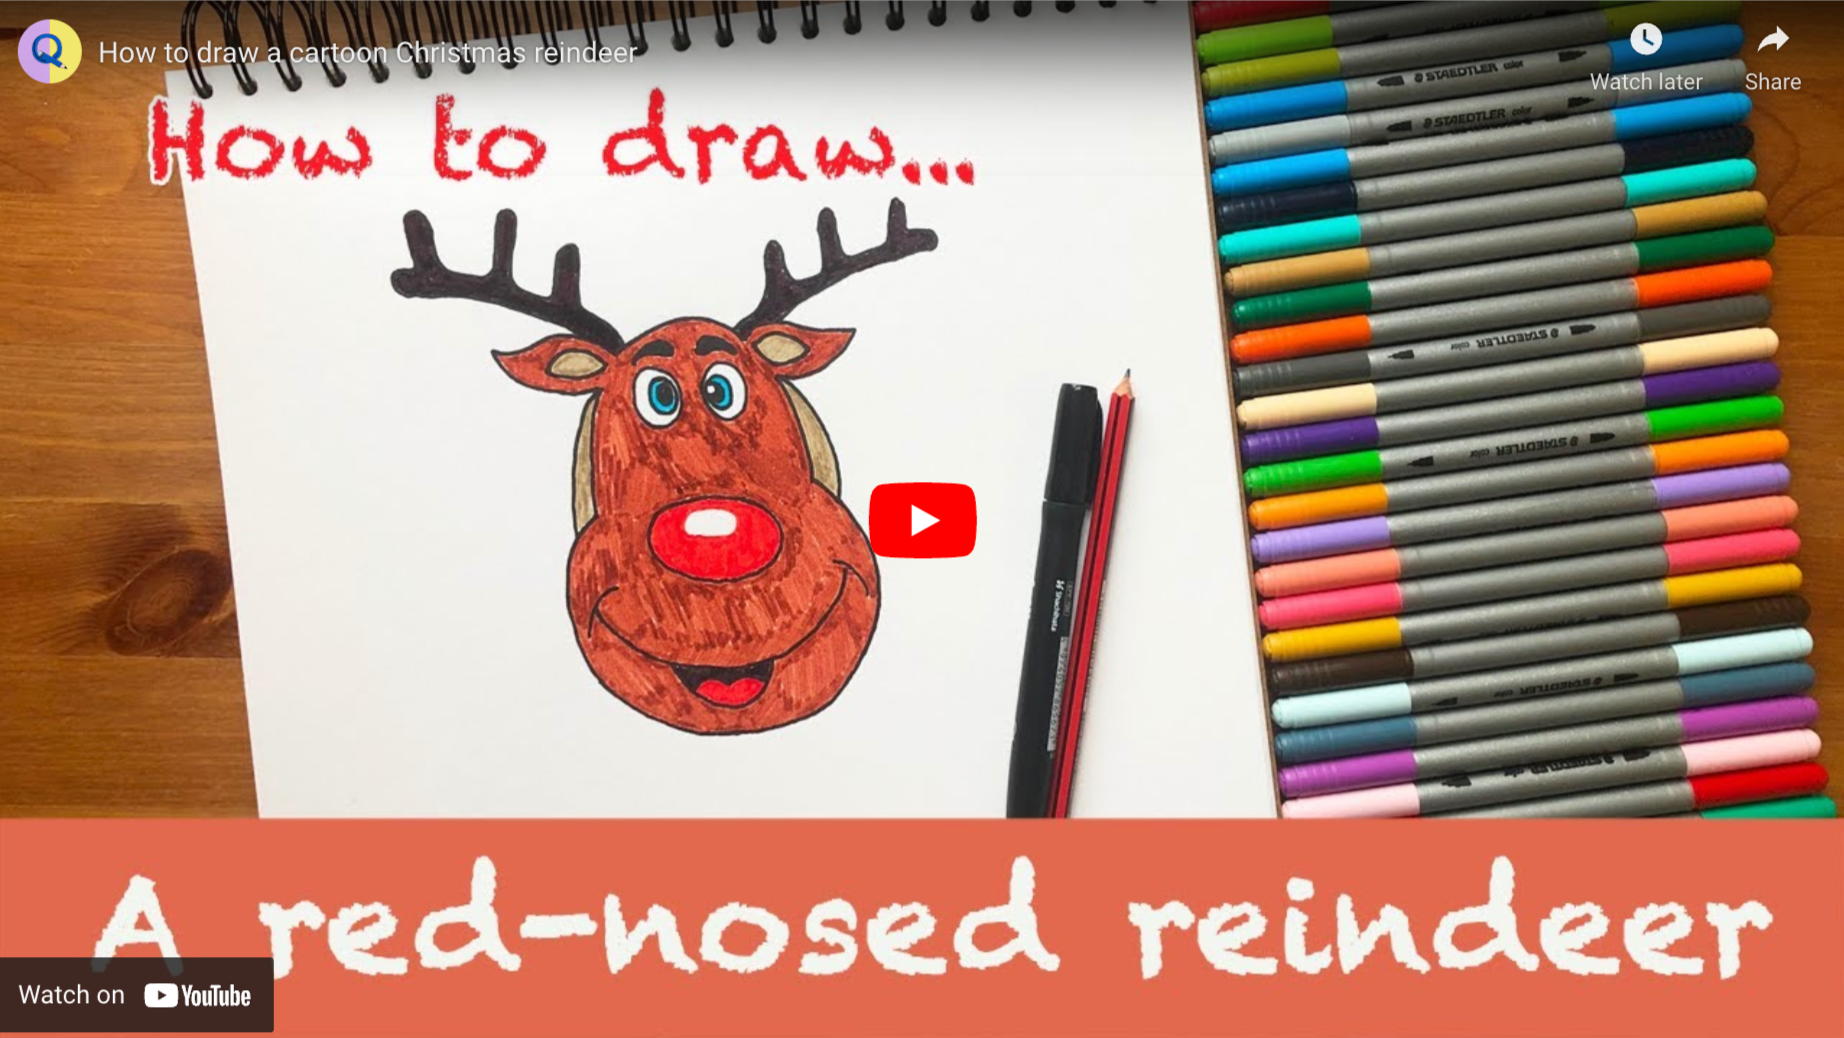 How to draw a Reindeer ➤ Reindeer Drawing Ideas